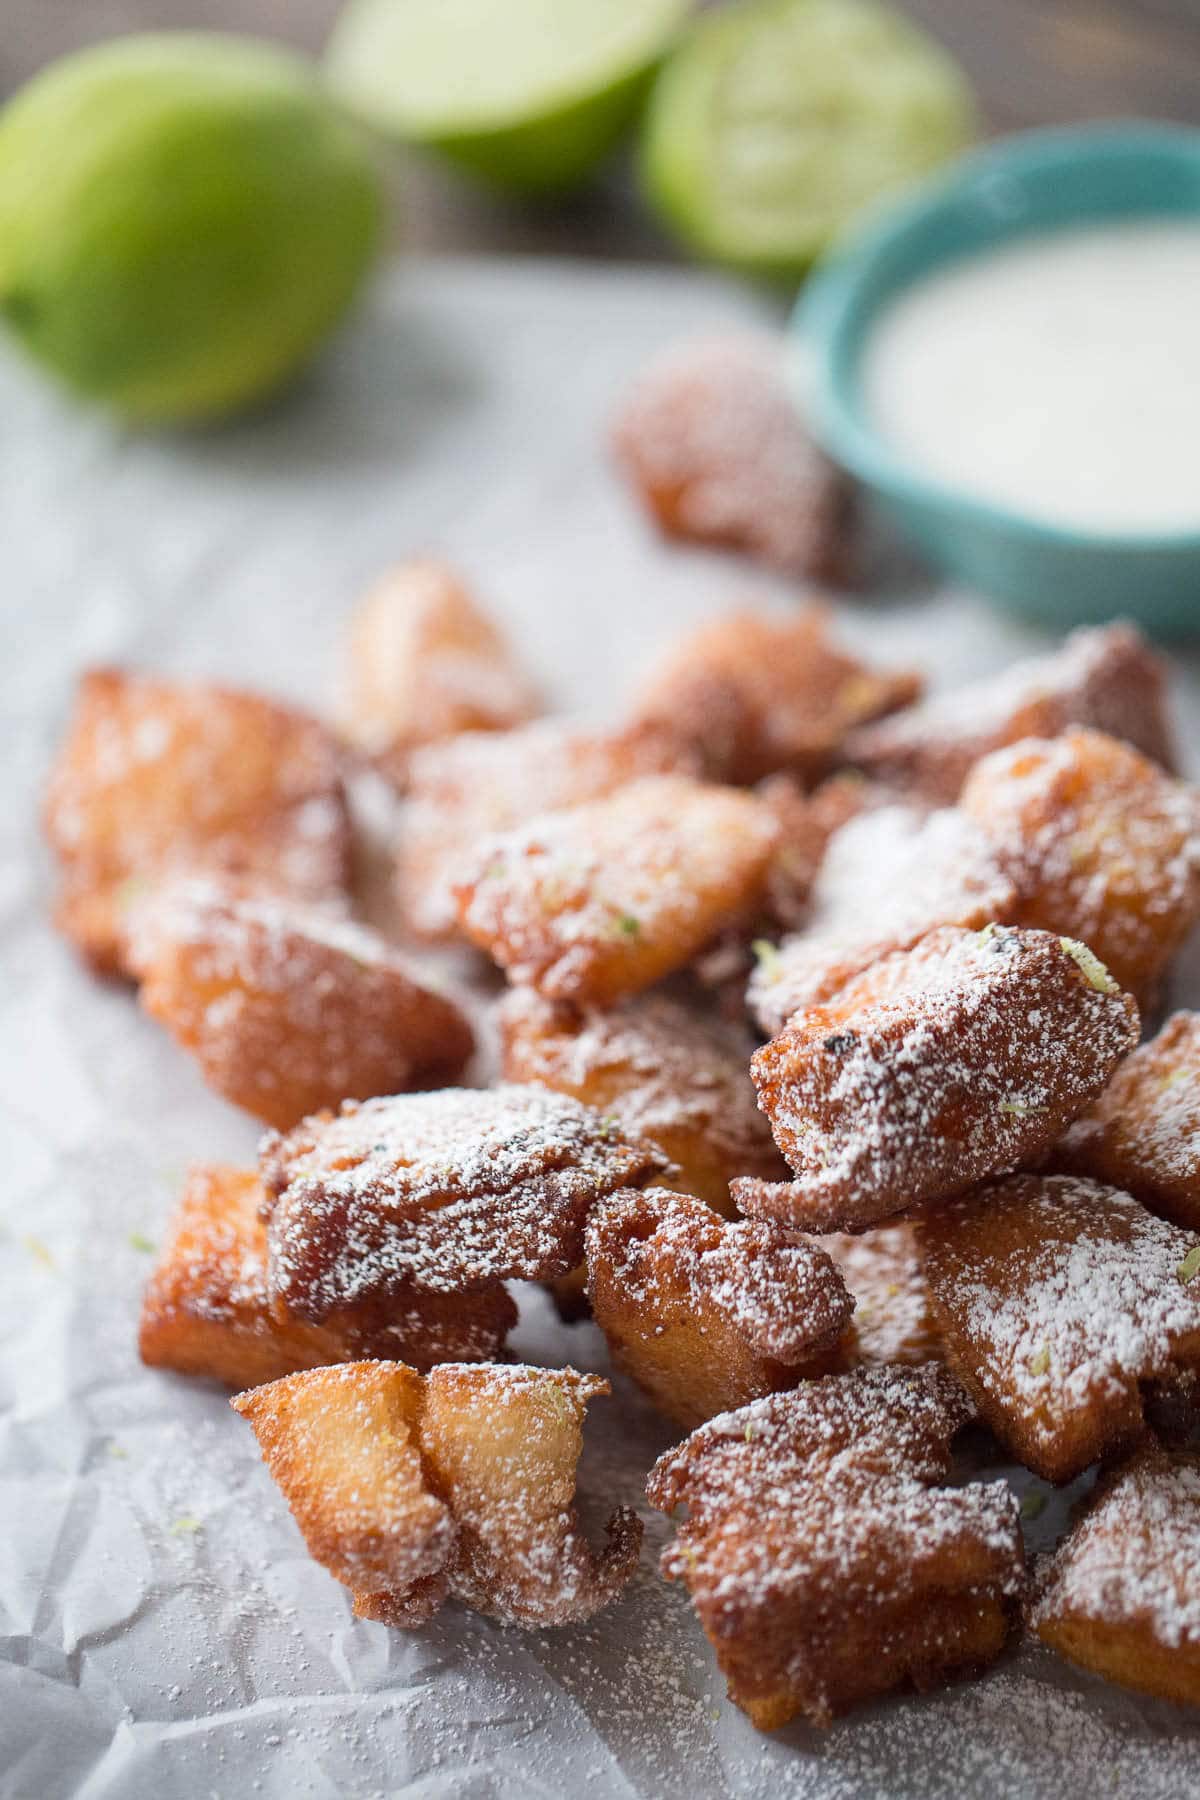 Angel food cake is dipped in tequila and fried just until golden; a sweet twist on tequila shots!